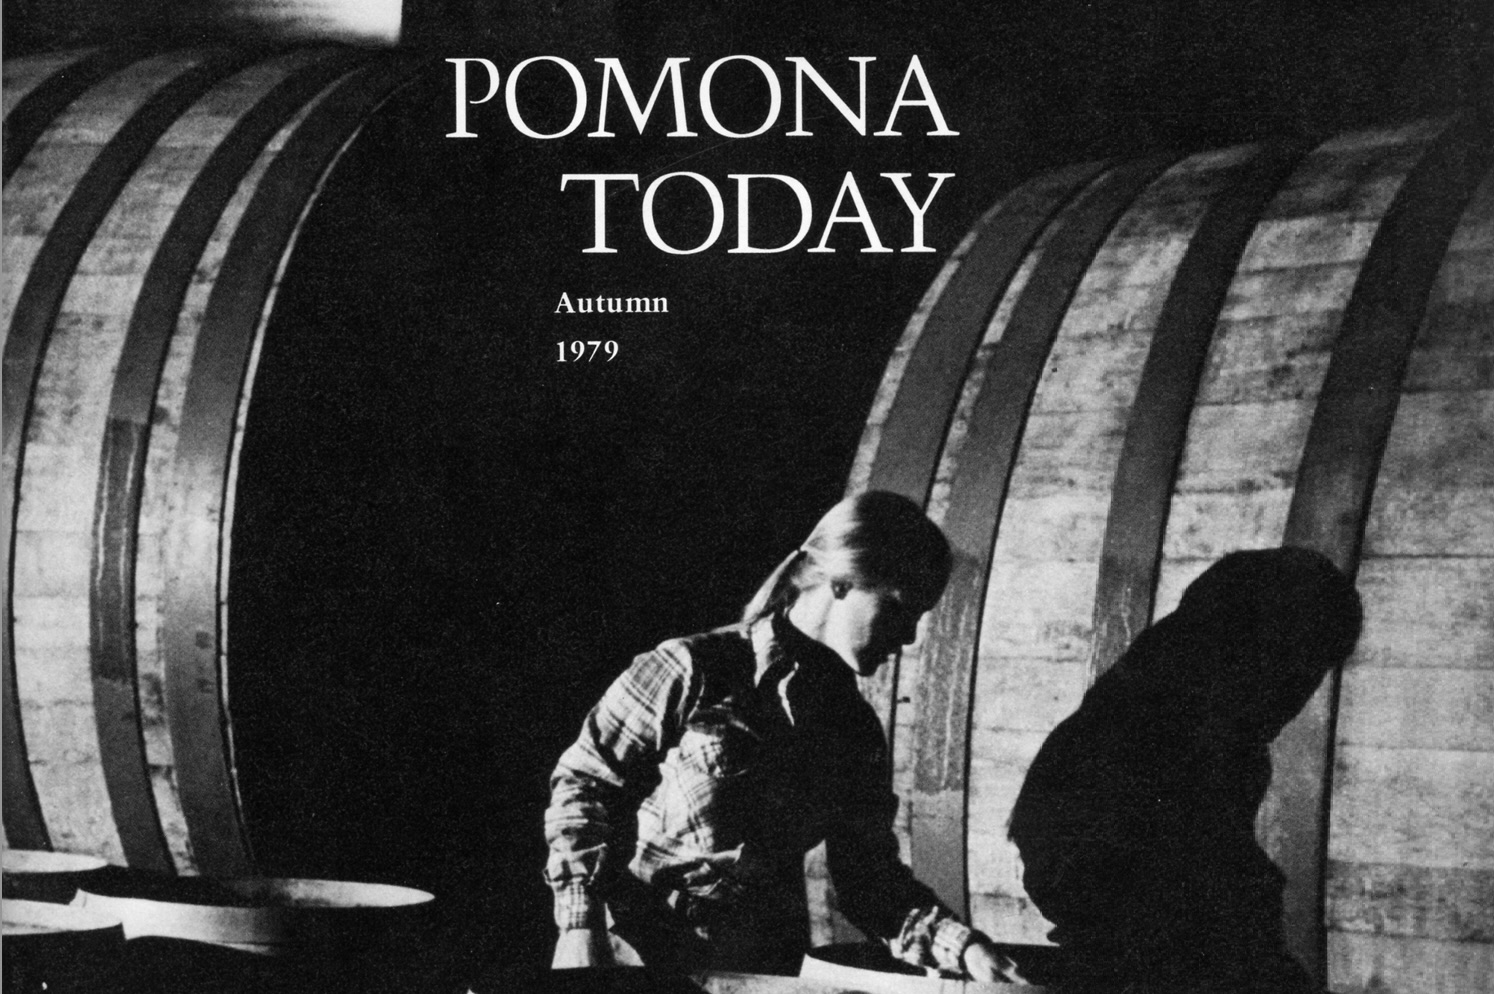 1979 Photo of Cathy Corison working in a winery barrel room, from the Pomona Today magazine dated Autumn 1979